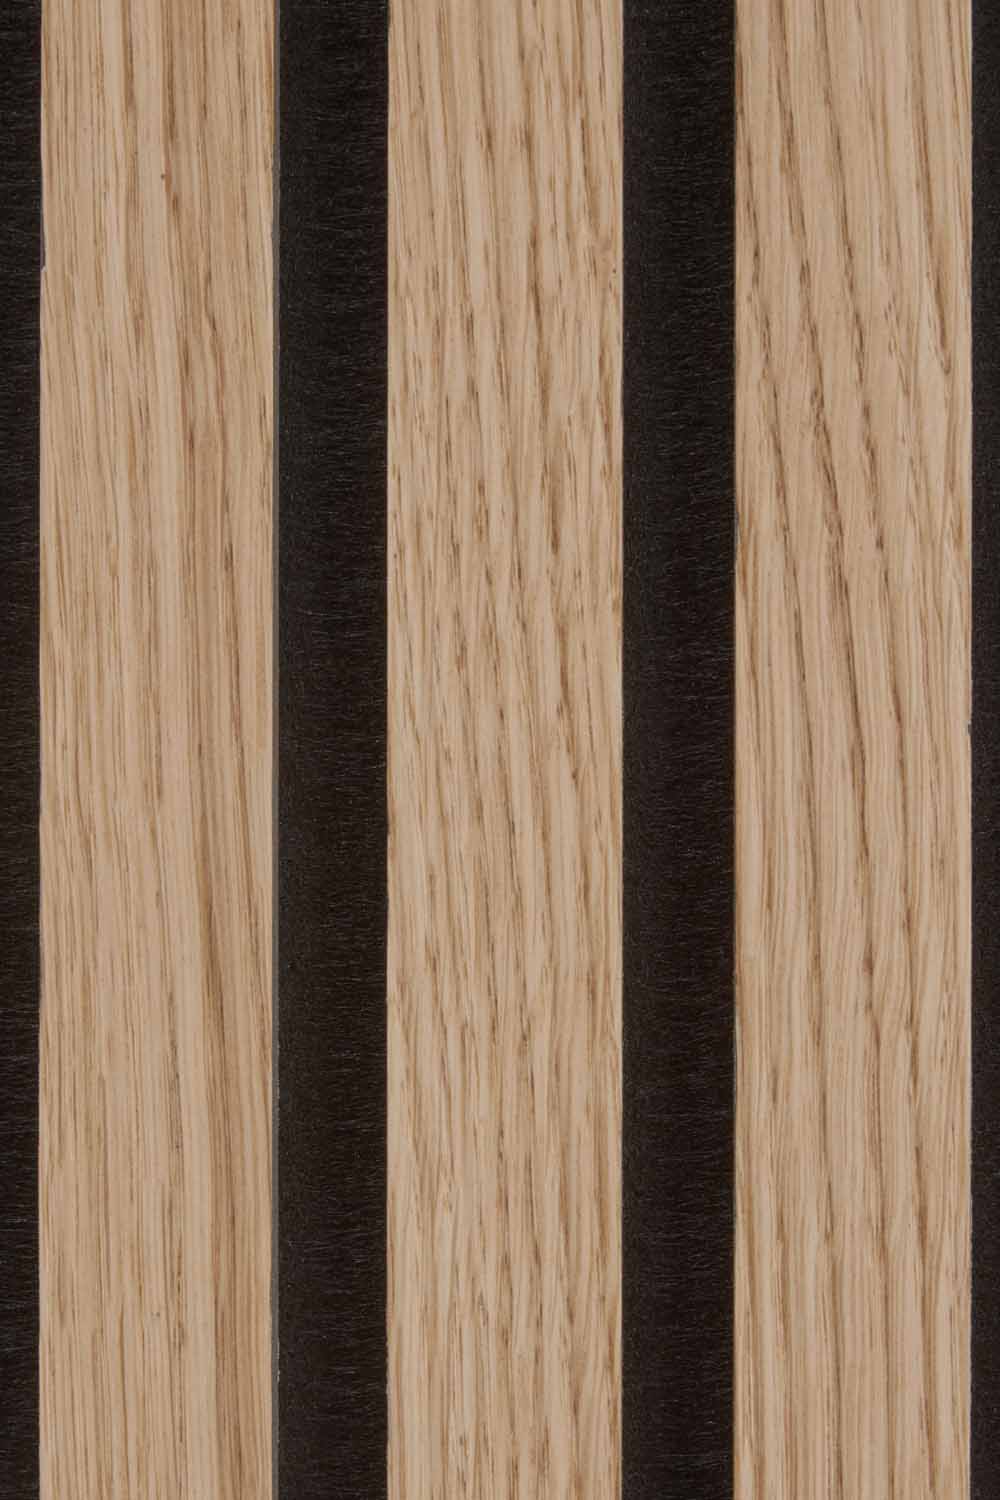 Texture of the Natural Oak and Black Acoustic SlatWall Panel from Naturewall.

